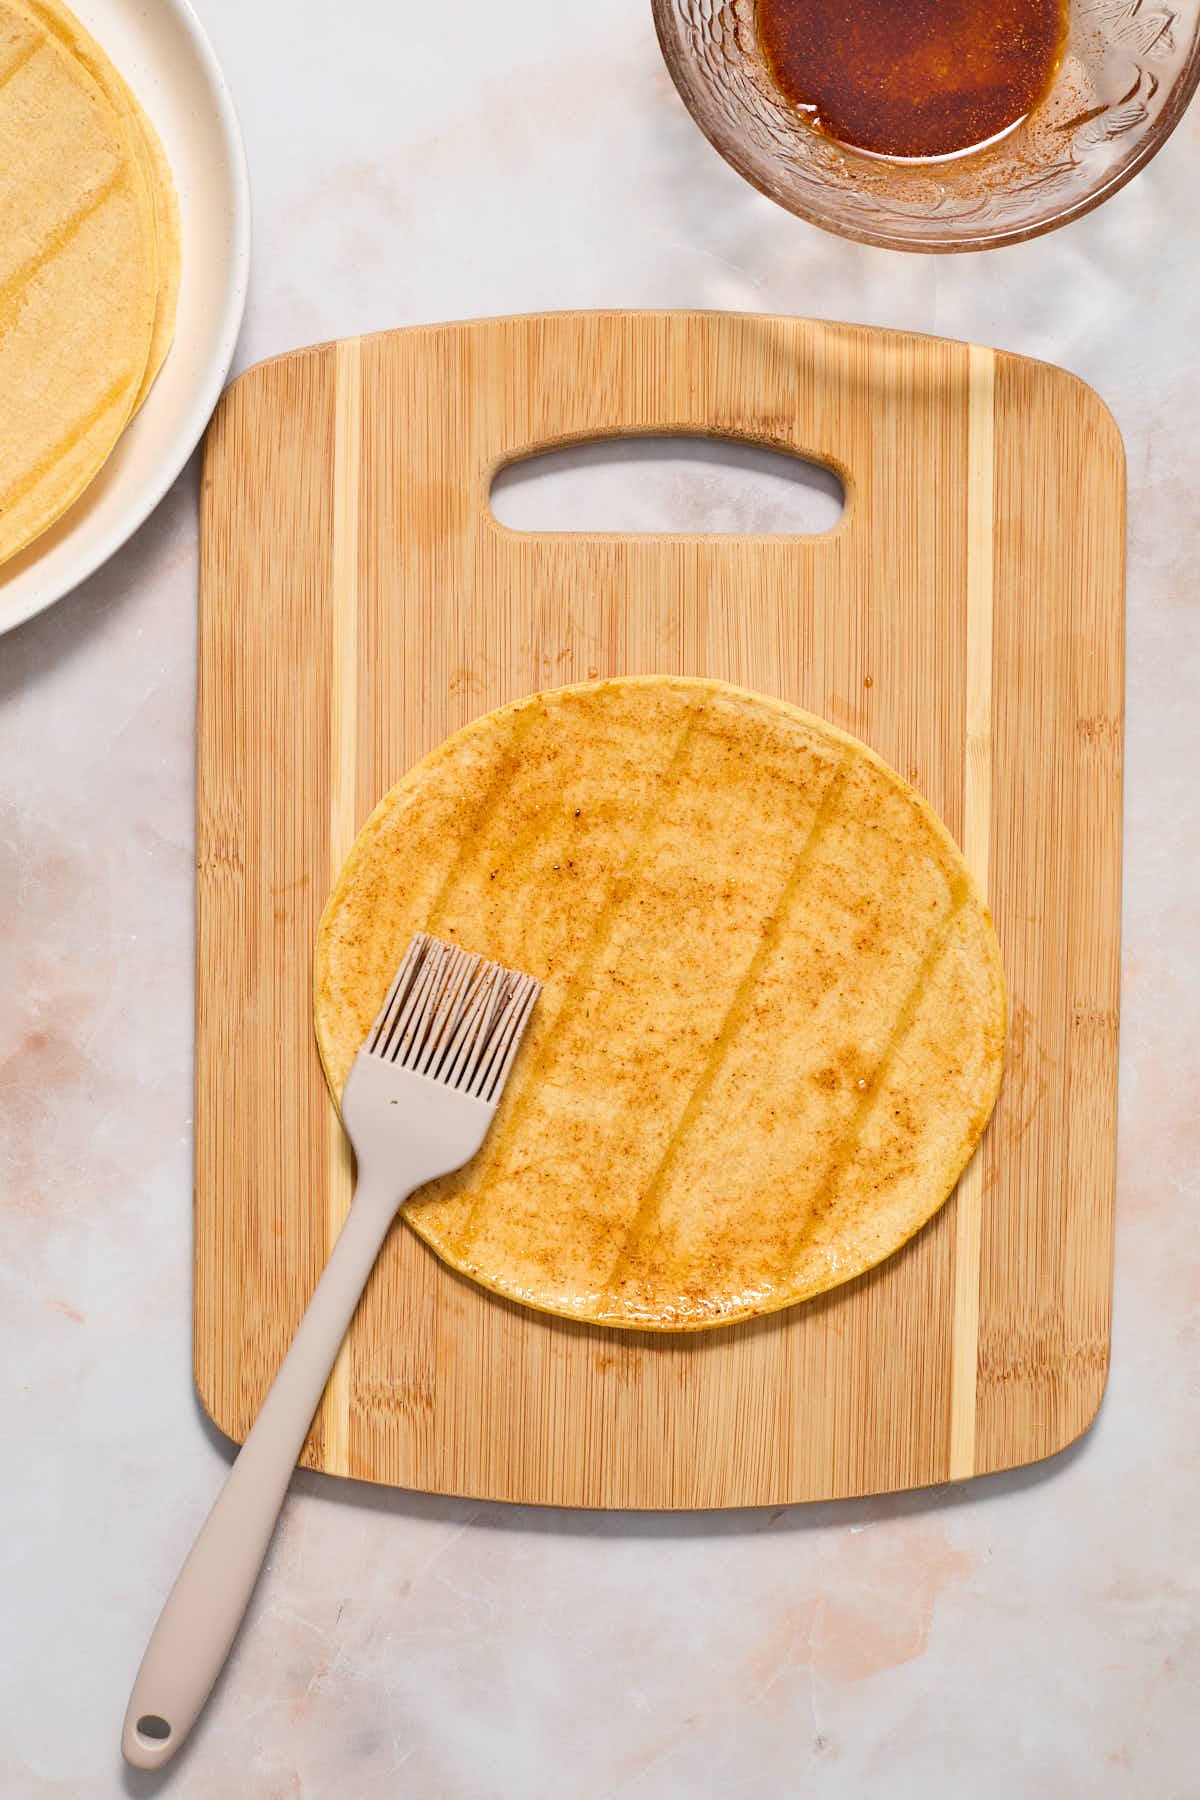 A corn tortilla on a wooden board being brushed with the oil mixture.